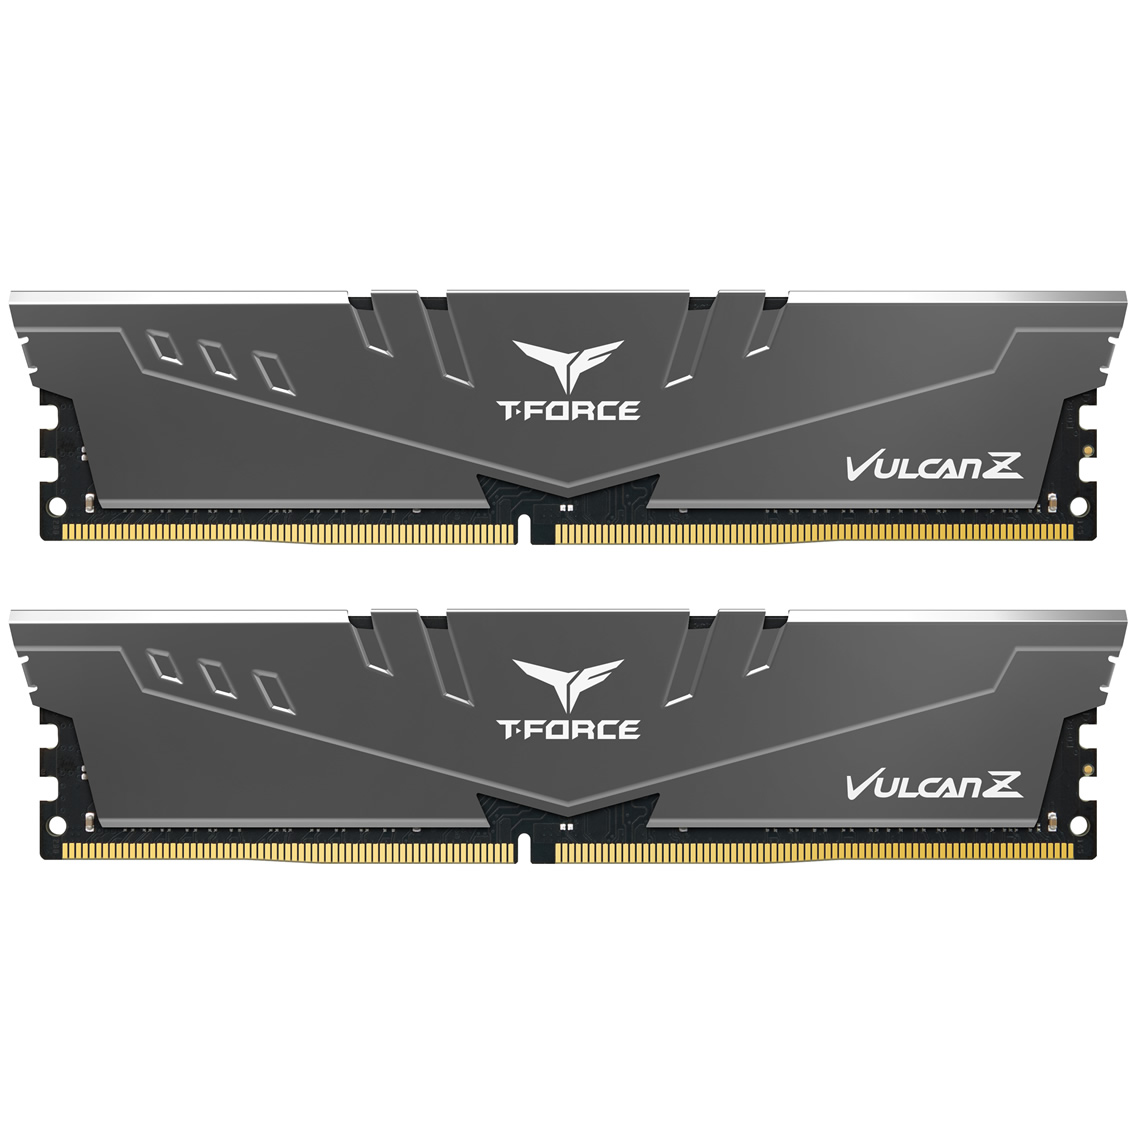 Team Group - Team Group Vulcan Z T-Force 16GB (2x8GB) DDR4 PC4-25600C16 3200MHz Dual Channel Kit - Grey